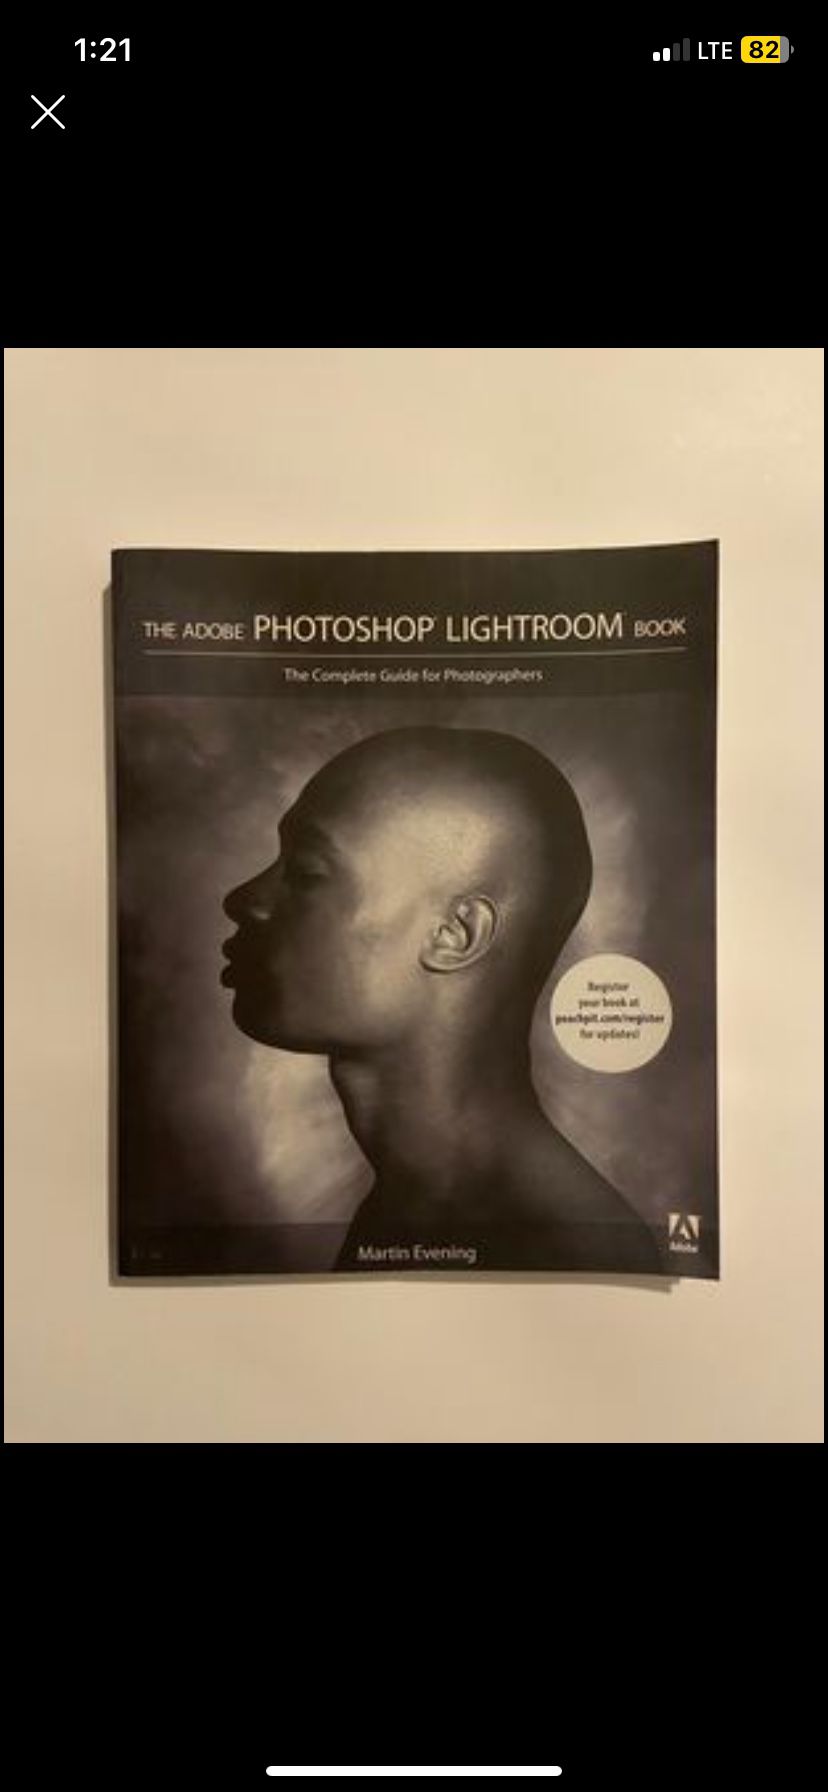 The Adobe Photoshop Lightroom Book: The Complete Guide for Photographers First Edition